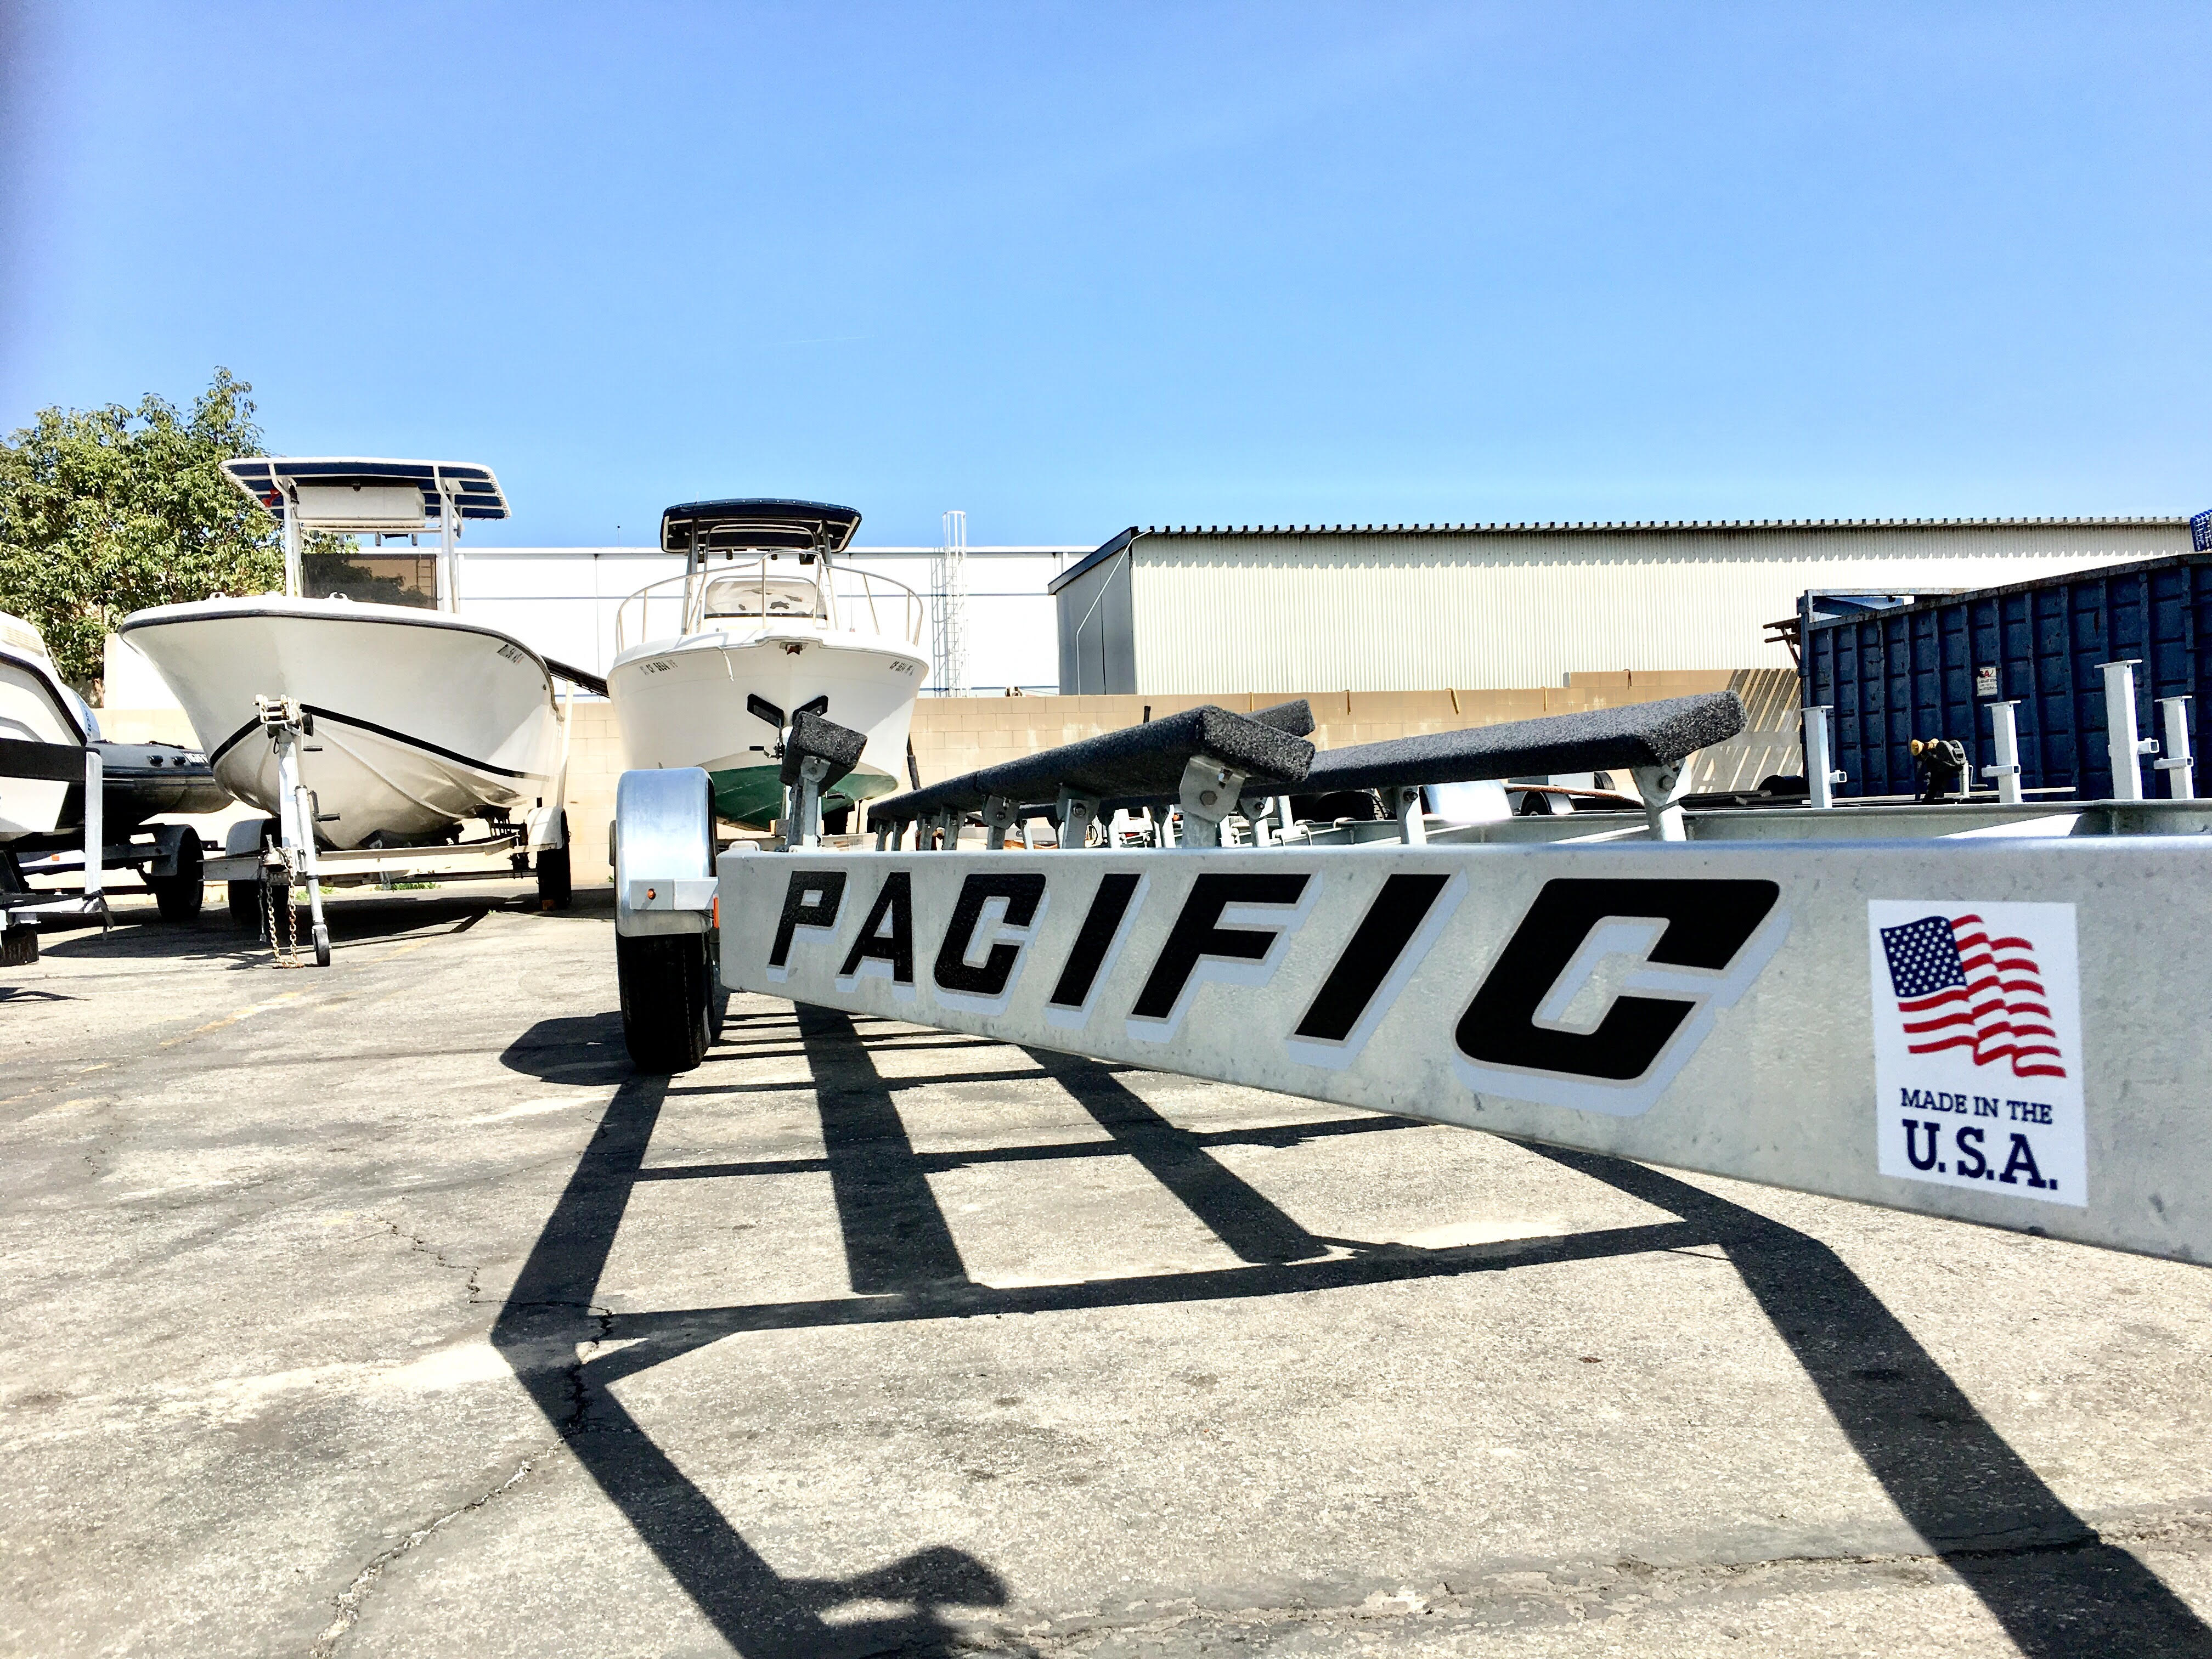 Pacific Boat Trailers - Made in the USA